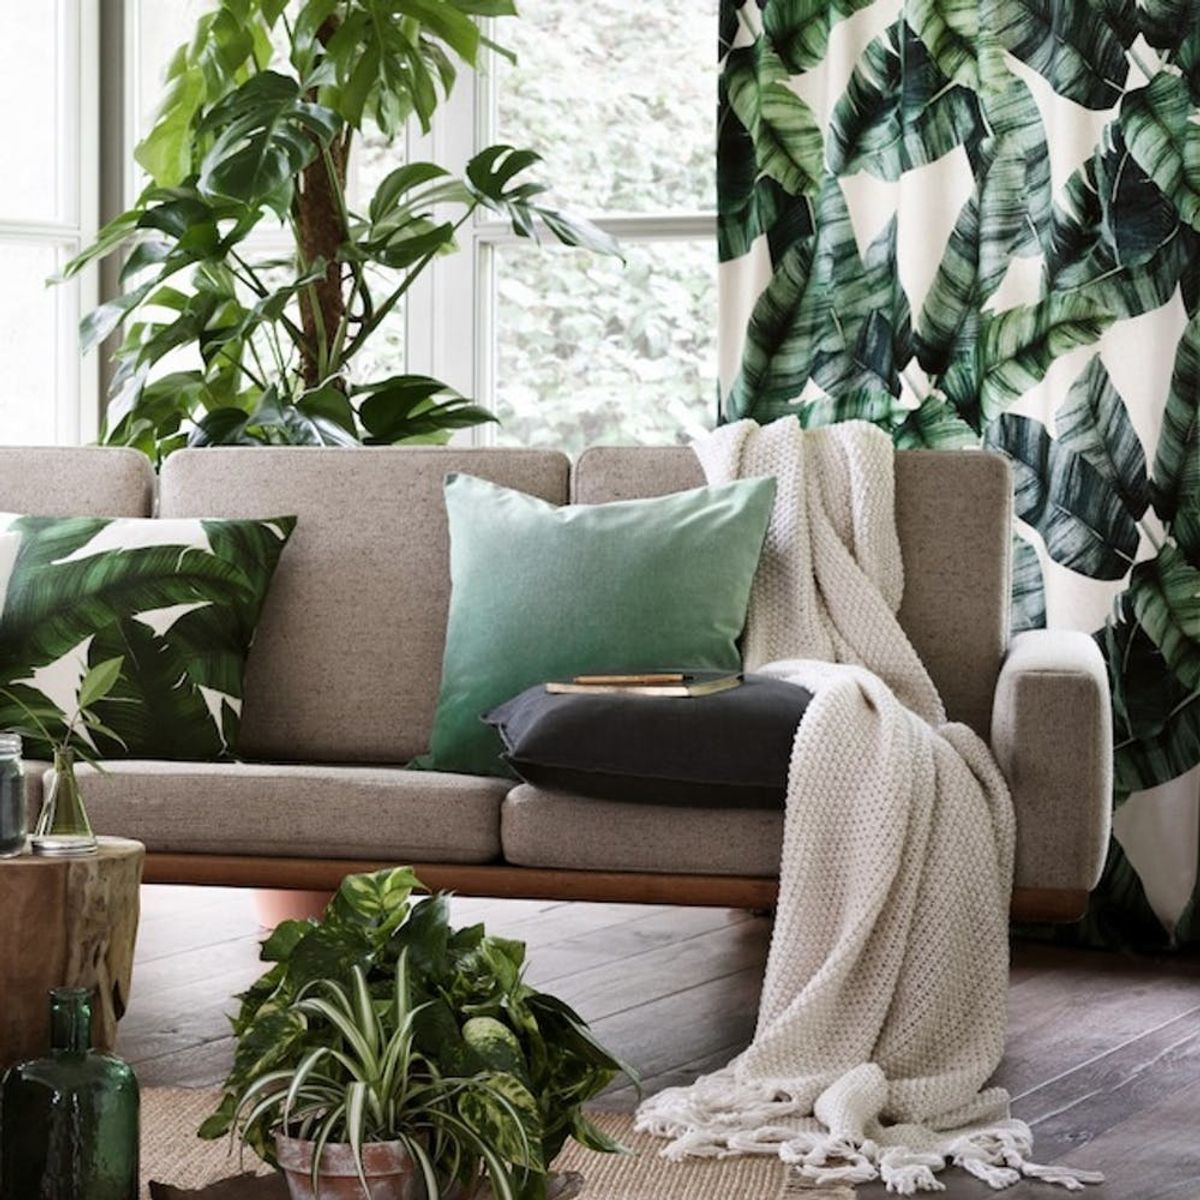 Here’s Everything You *Need* from H&M’s Affordable Spring Home Collection